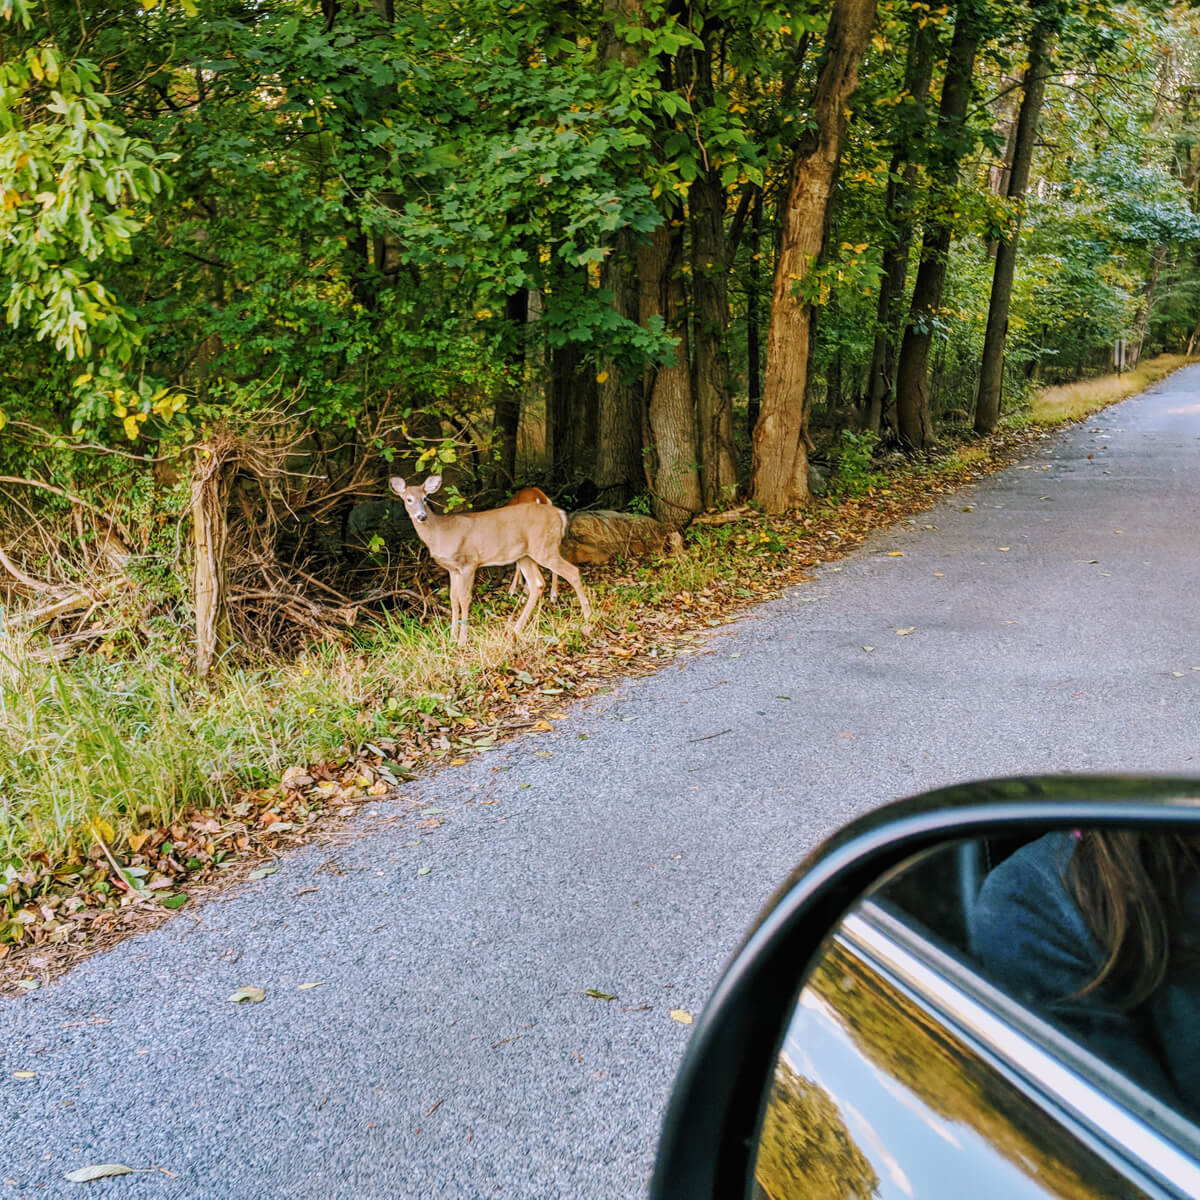 Plant Deer-Resistant Annuals to Discourage Deer in the Garden - here a deer is in the road visible from the car